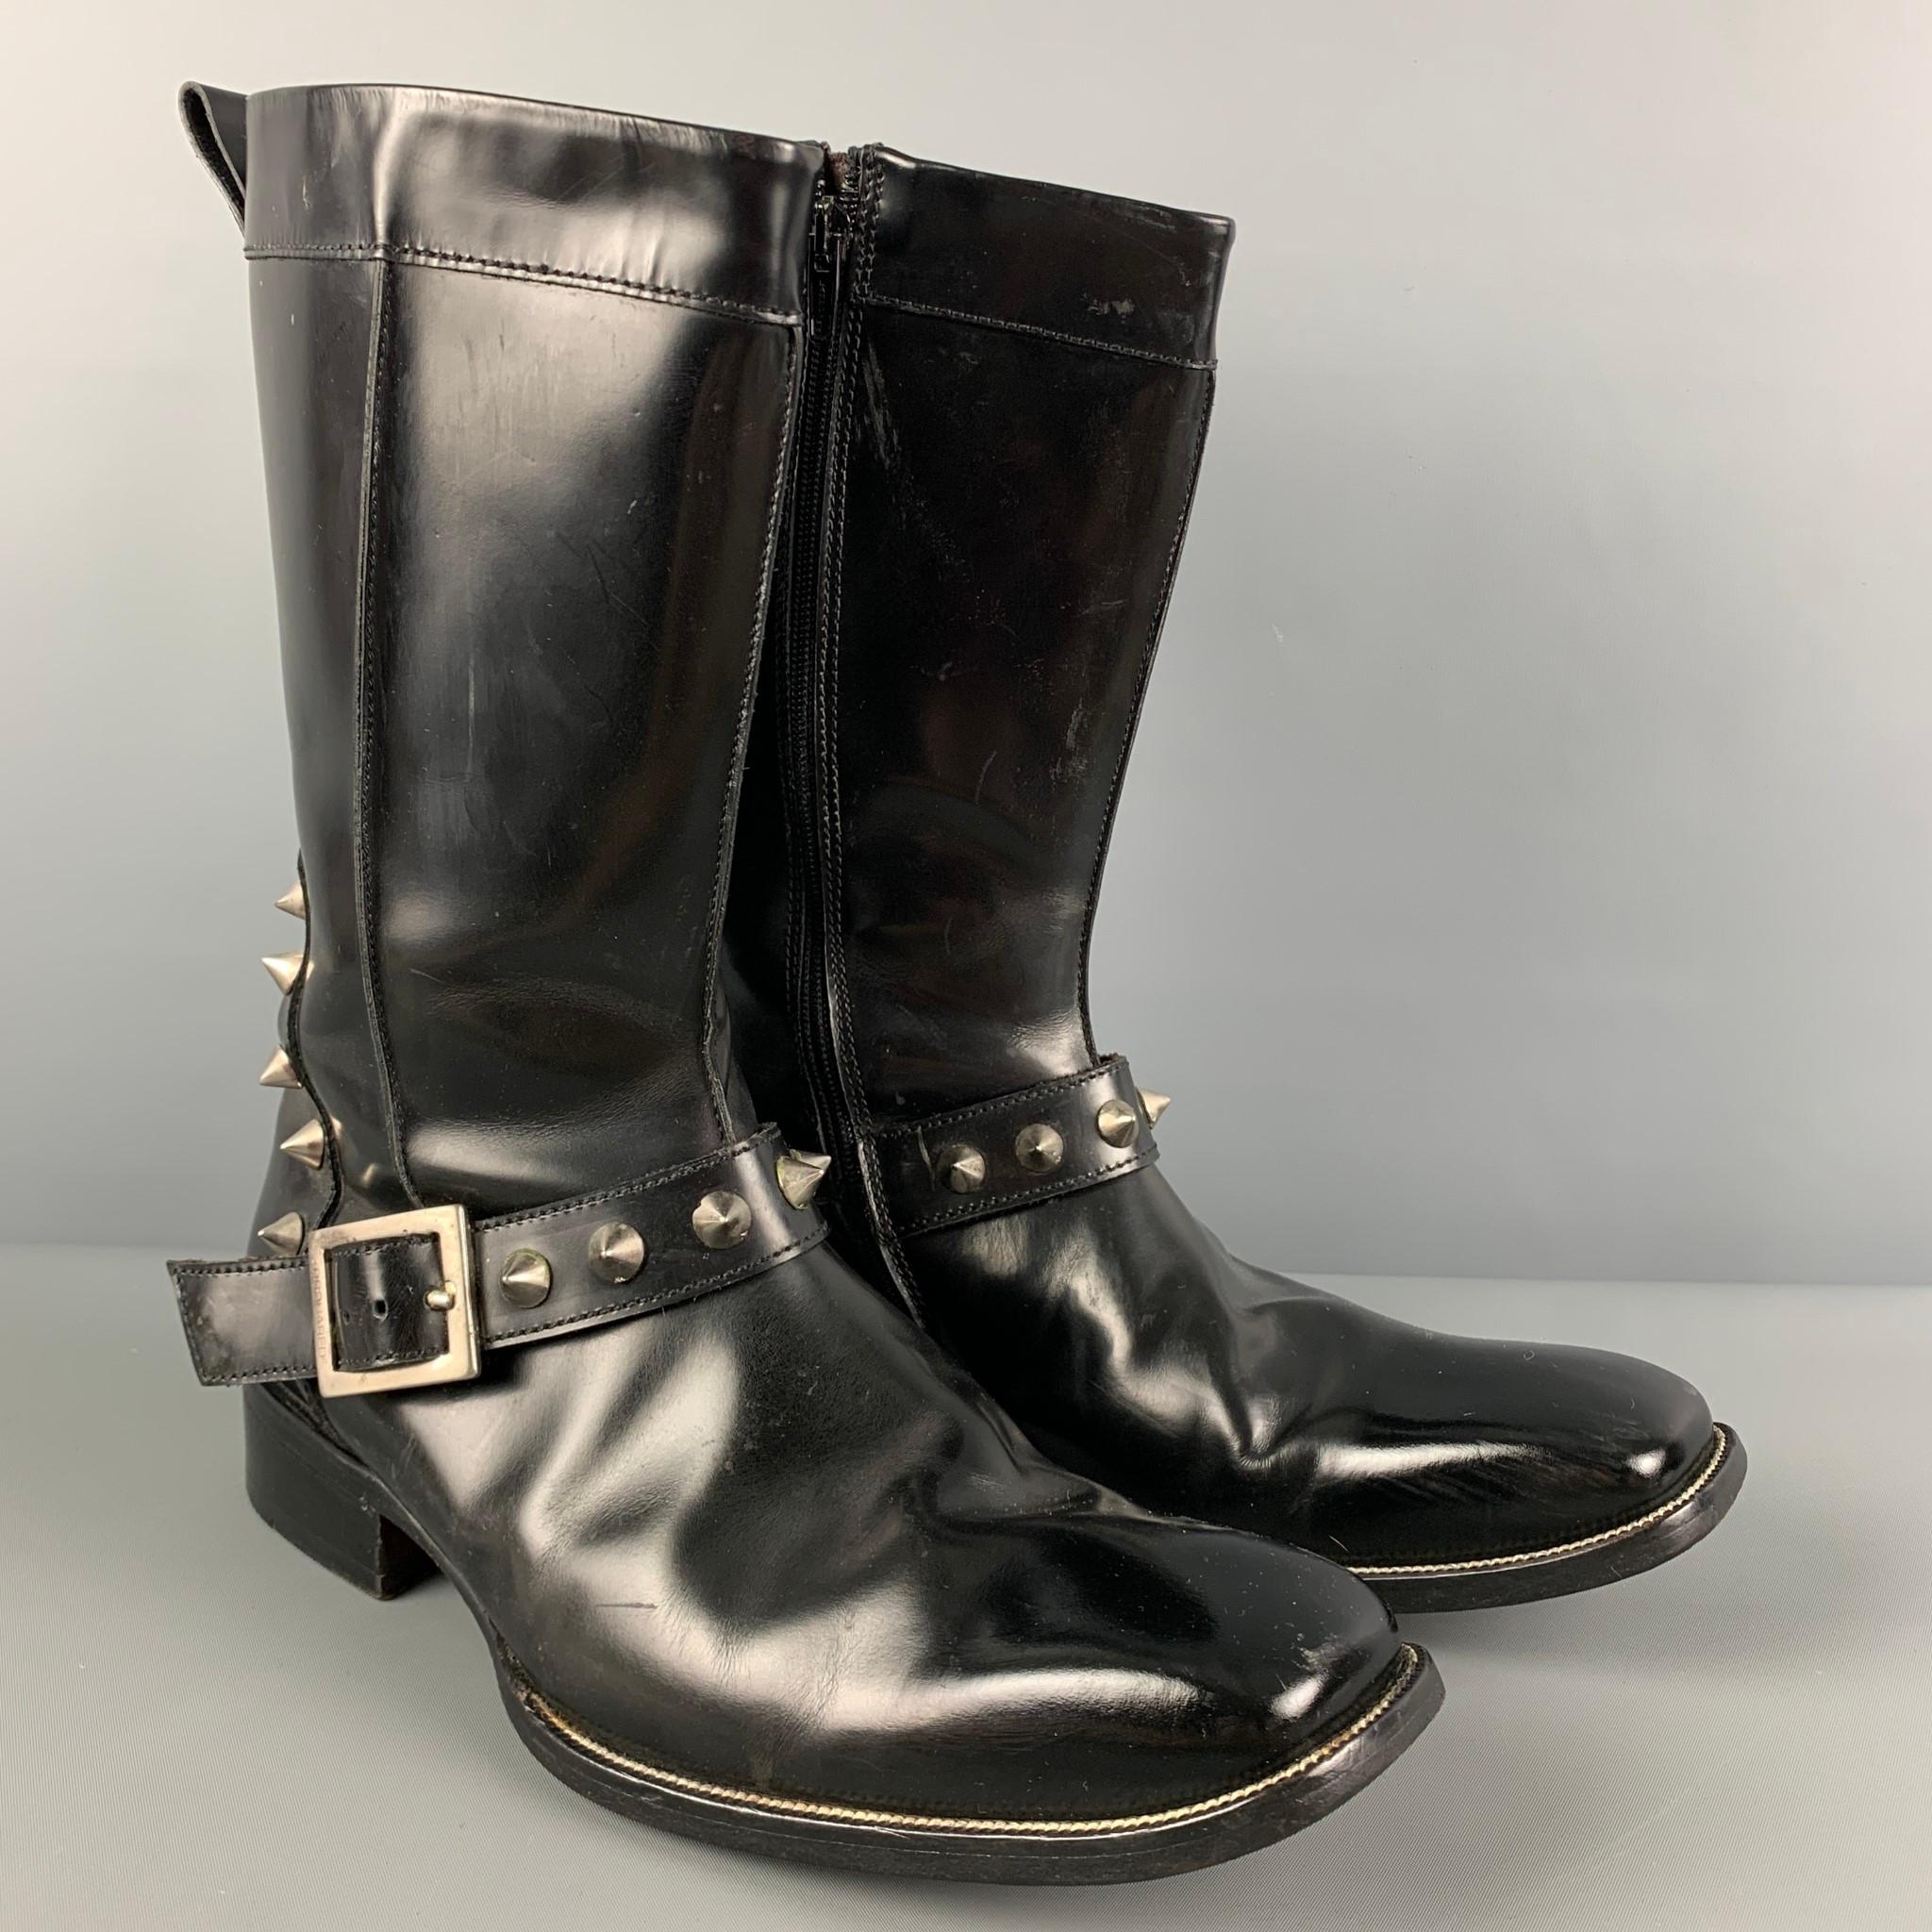 DSQUARED2 boots comes in a black leather featuring a square toe, silver tone studded details, strap detail, chunky heel, and a side zipper closure. Made in Italy. 

Very Good Pre-Owned Condition. Light wear throughout. As-is.
Marked: 43
Original